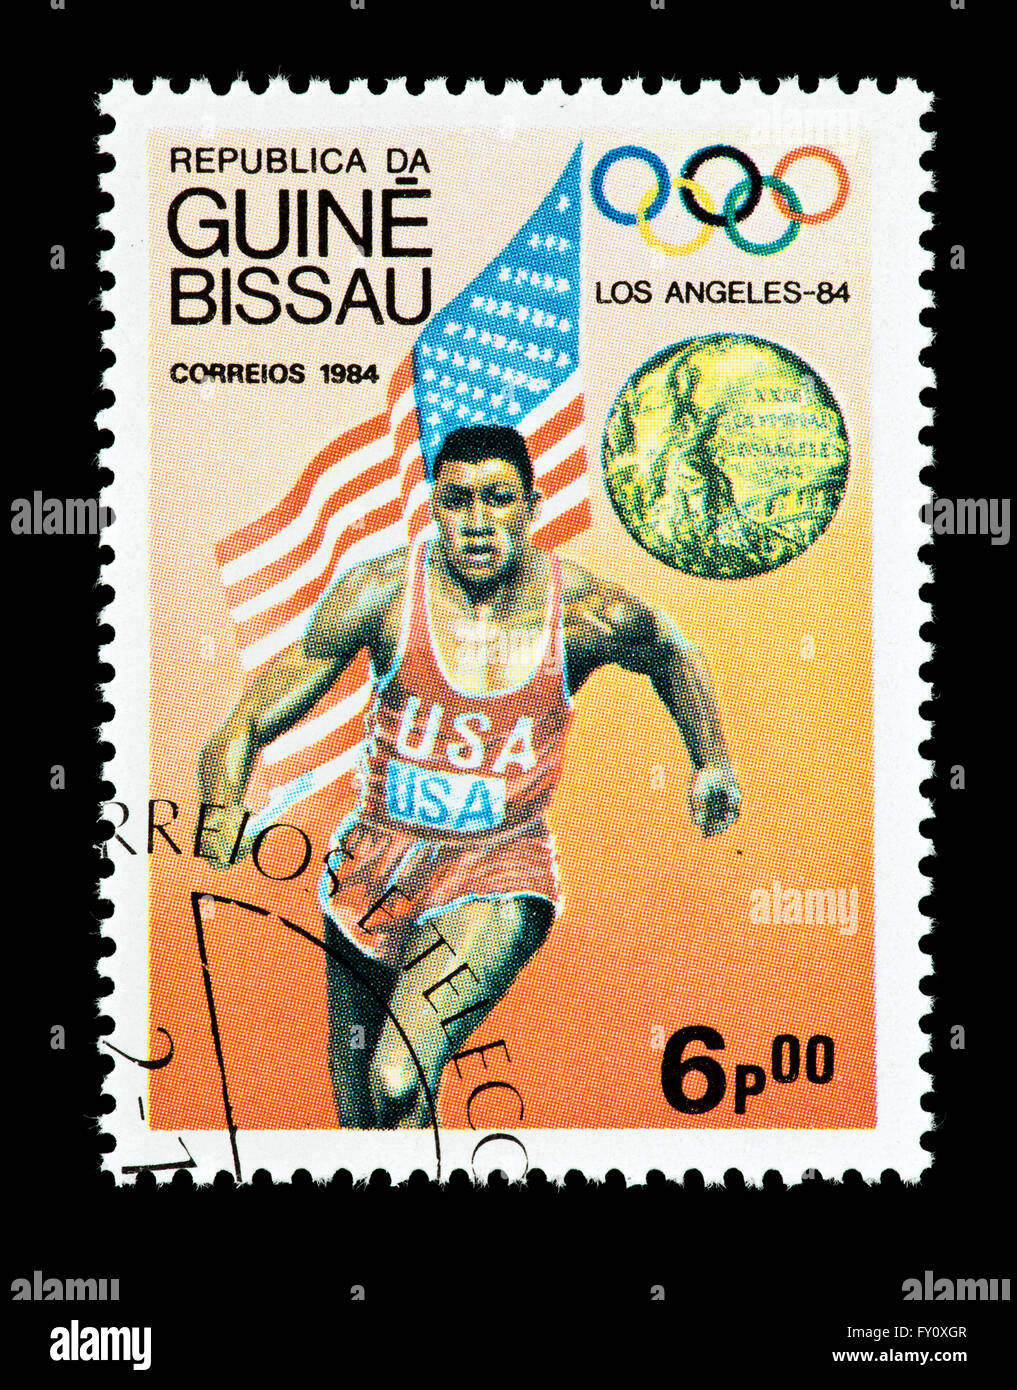 Postage stamp from the United States depicting Carl Lewis, 4x100 meter relay, 1984 Summer Olympic Games in Los Angeles. Stock Photo